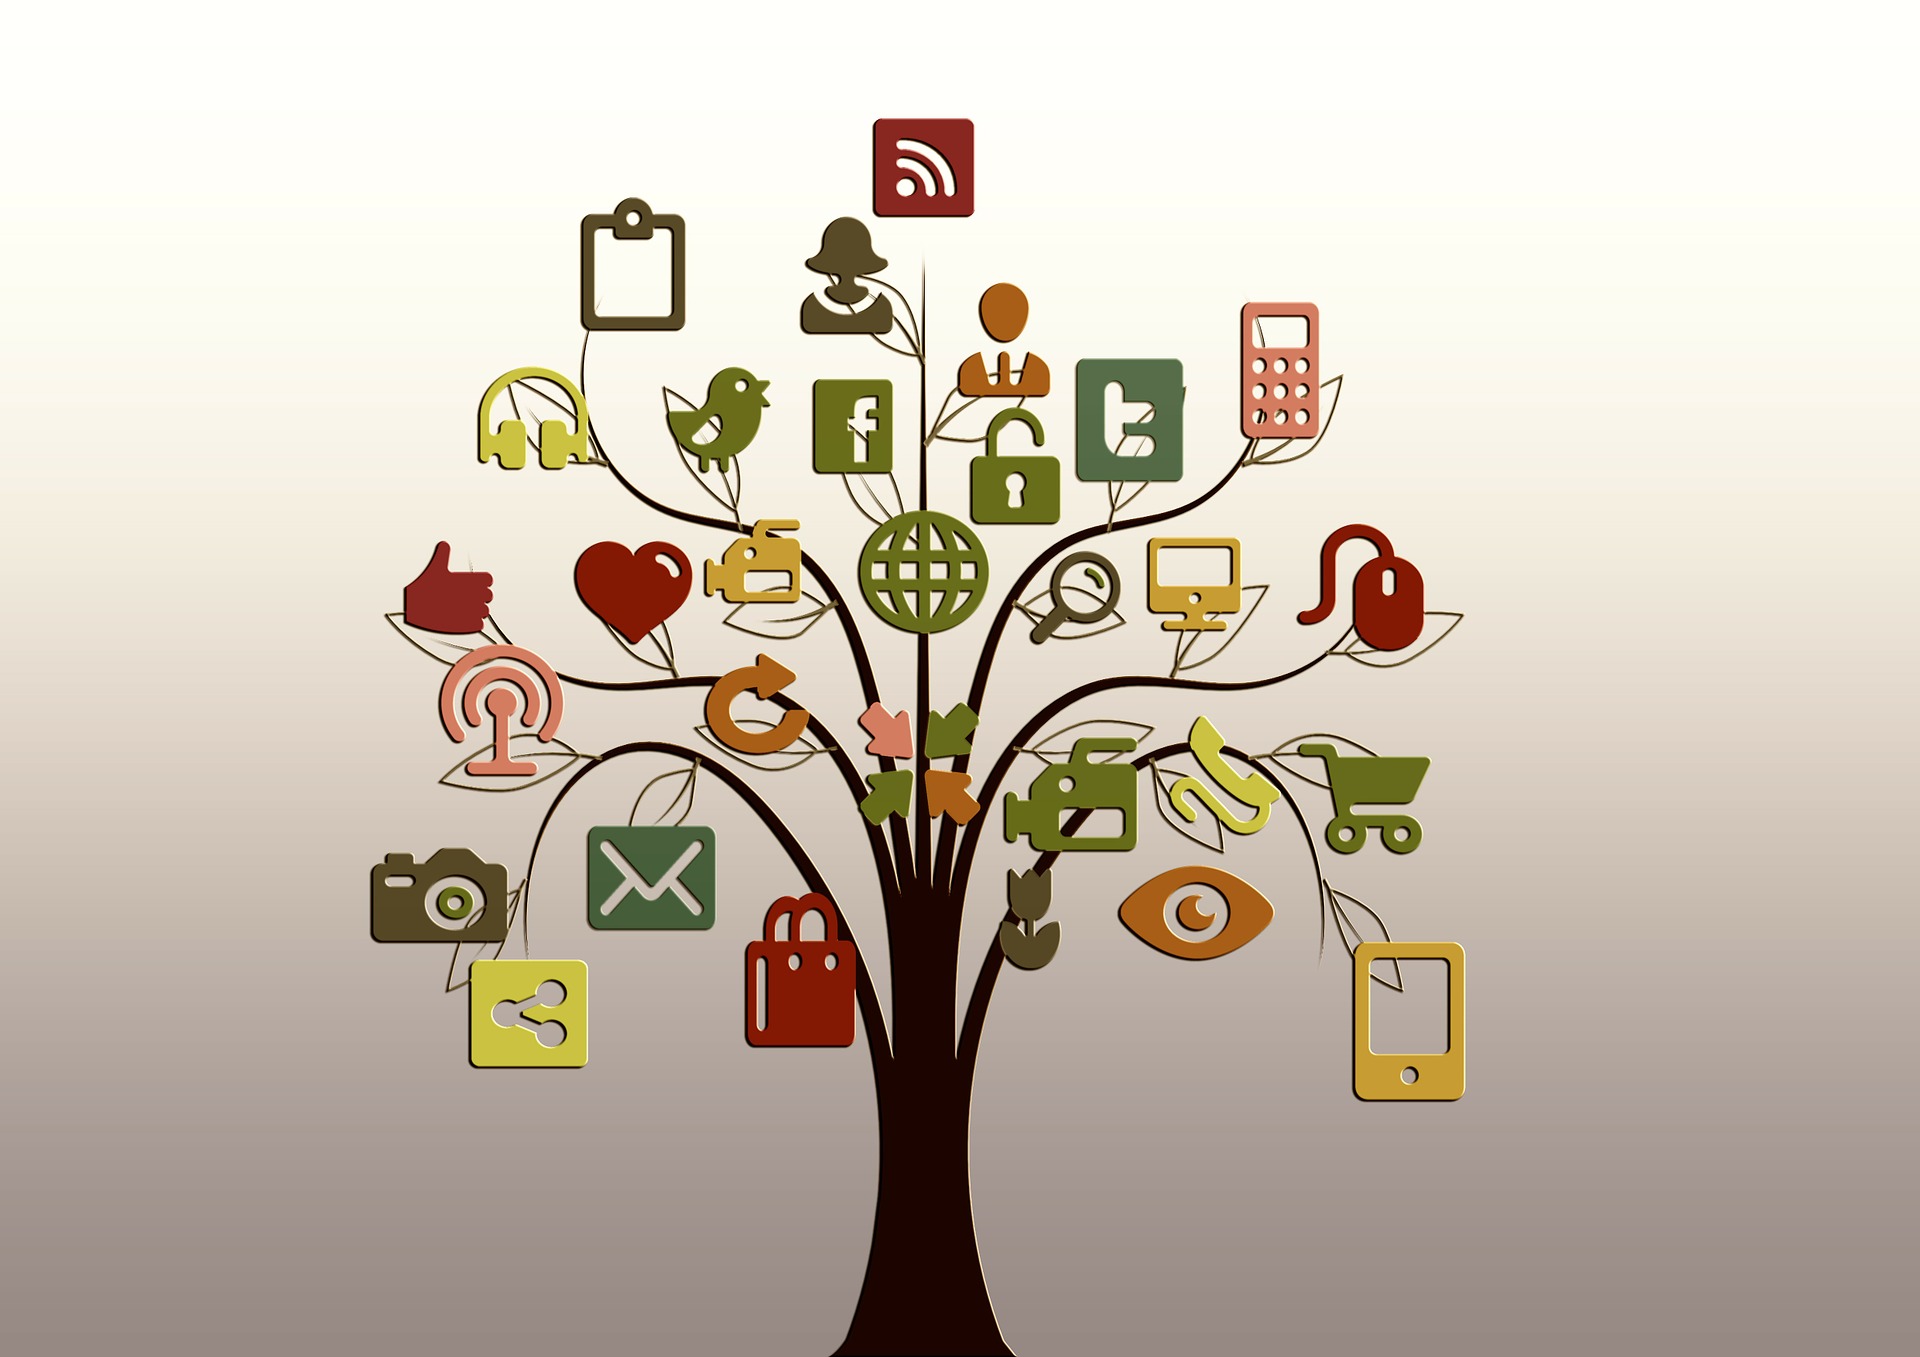 A tree with online and social icons